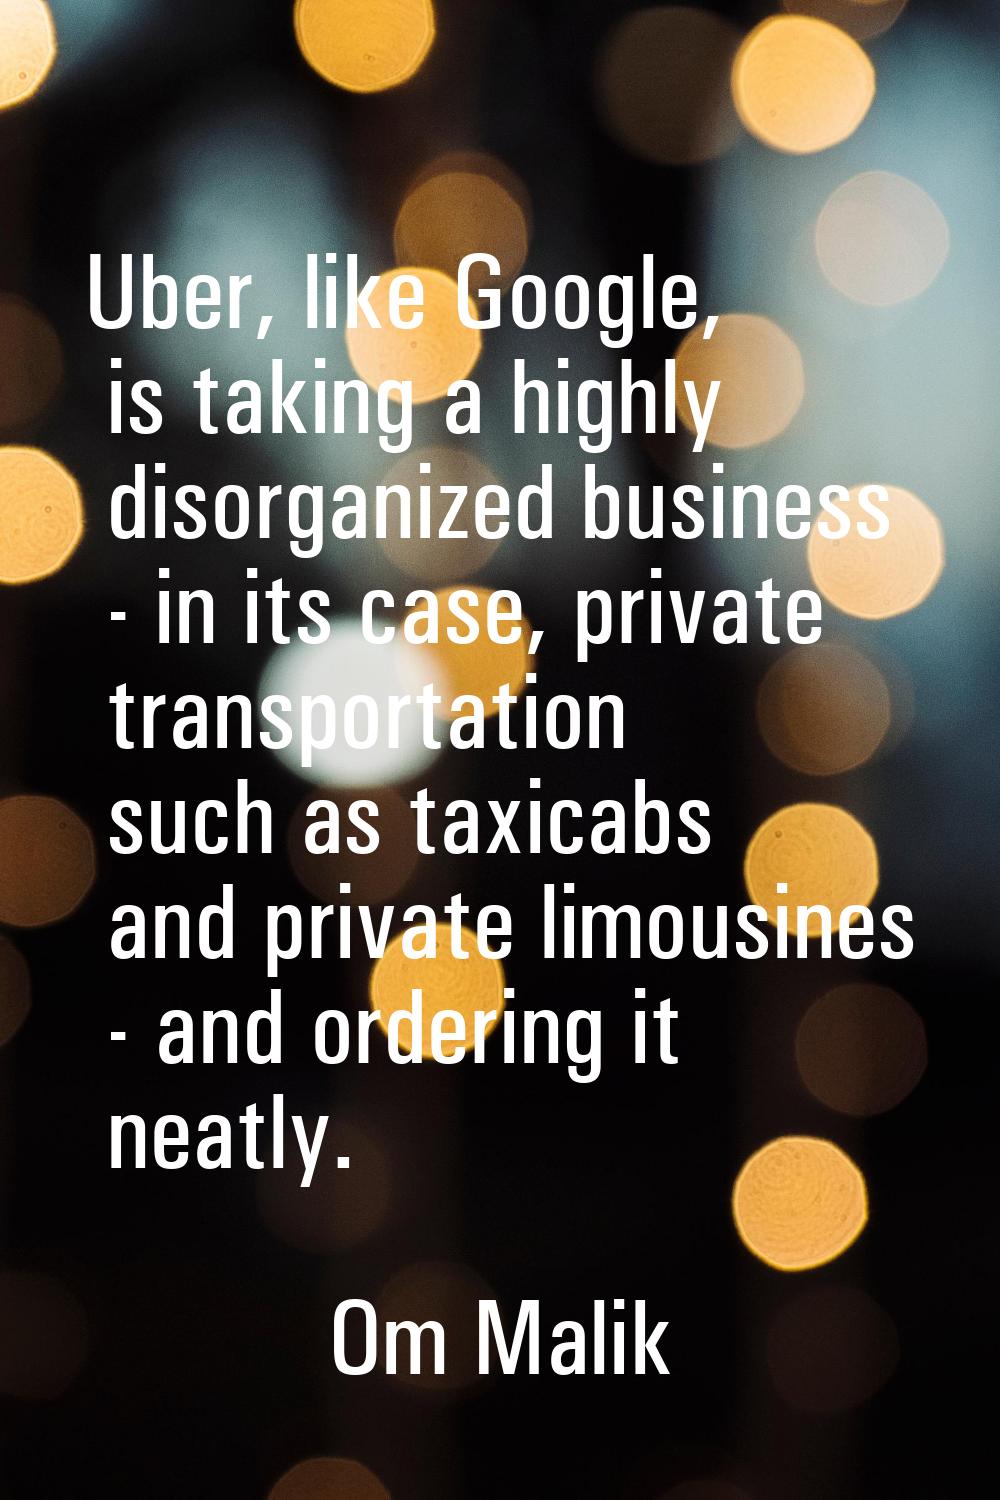 Uber, like Google, is taking a highly disorganized business - in its case, private transportation s